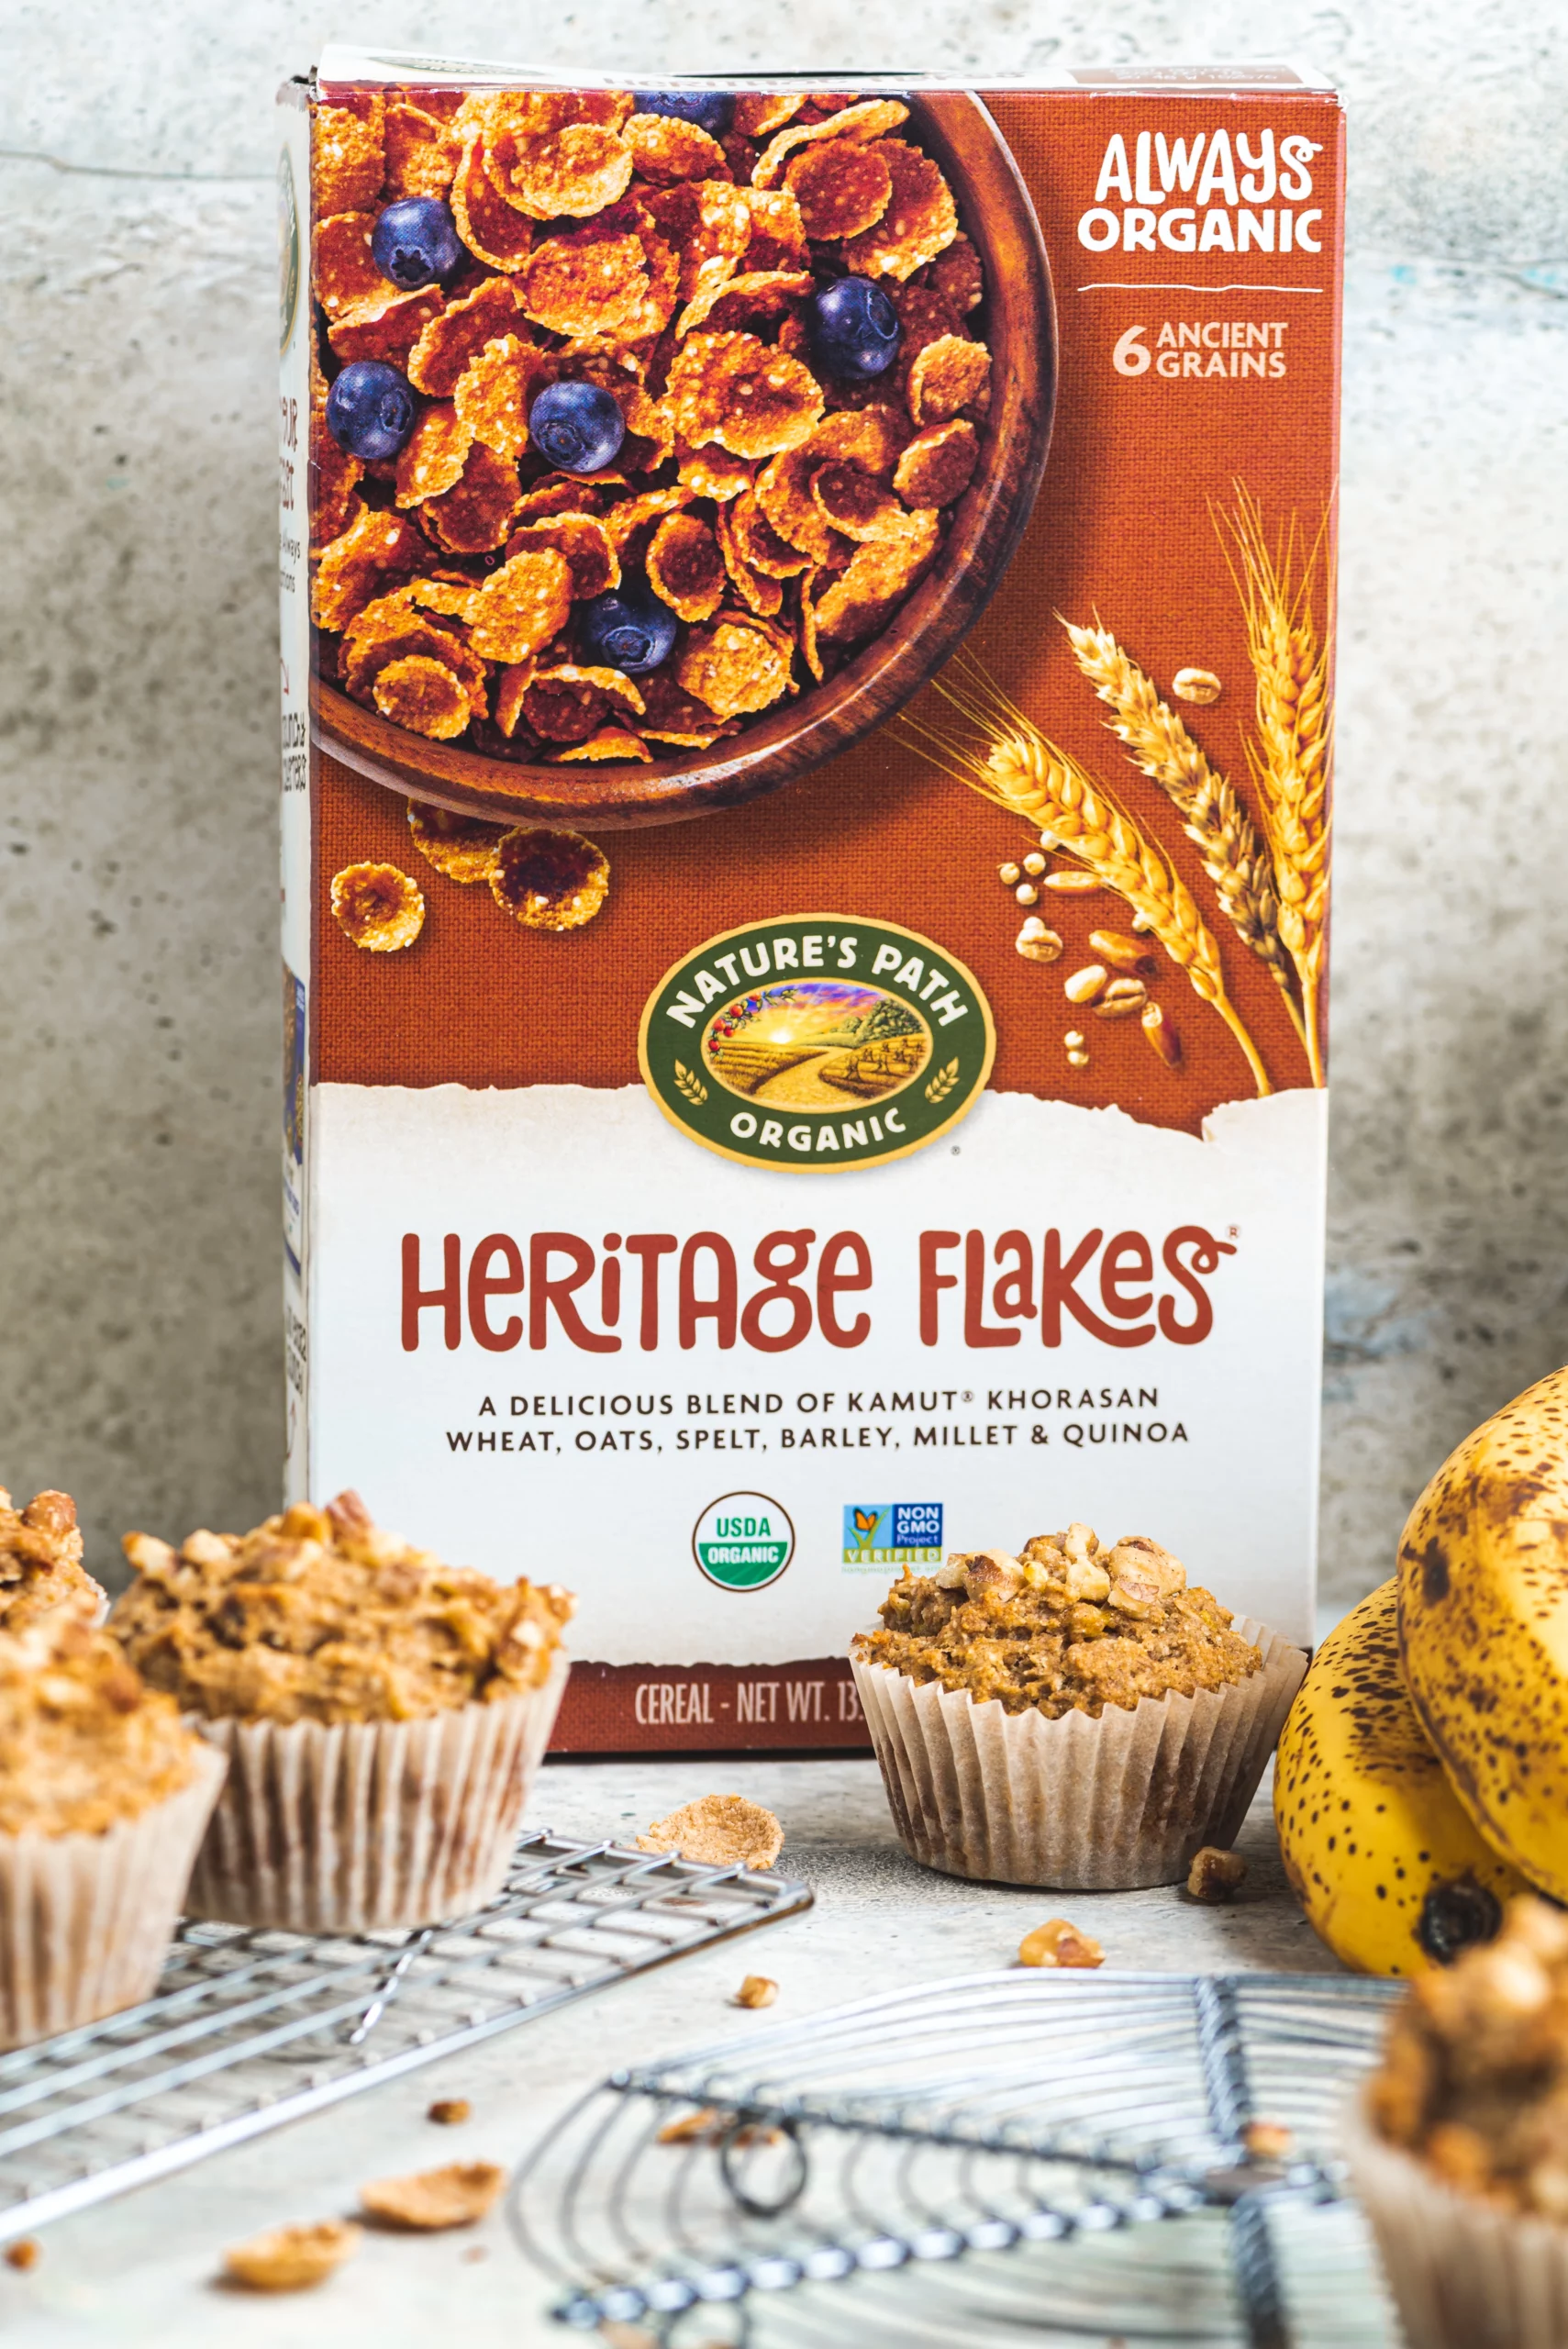 a box of heritage flakes cereal with a few muffins on cooling trays in front